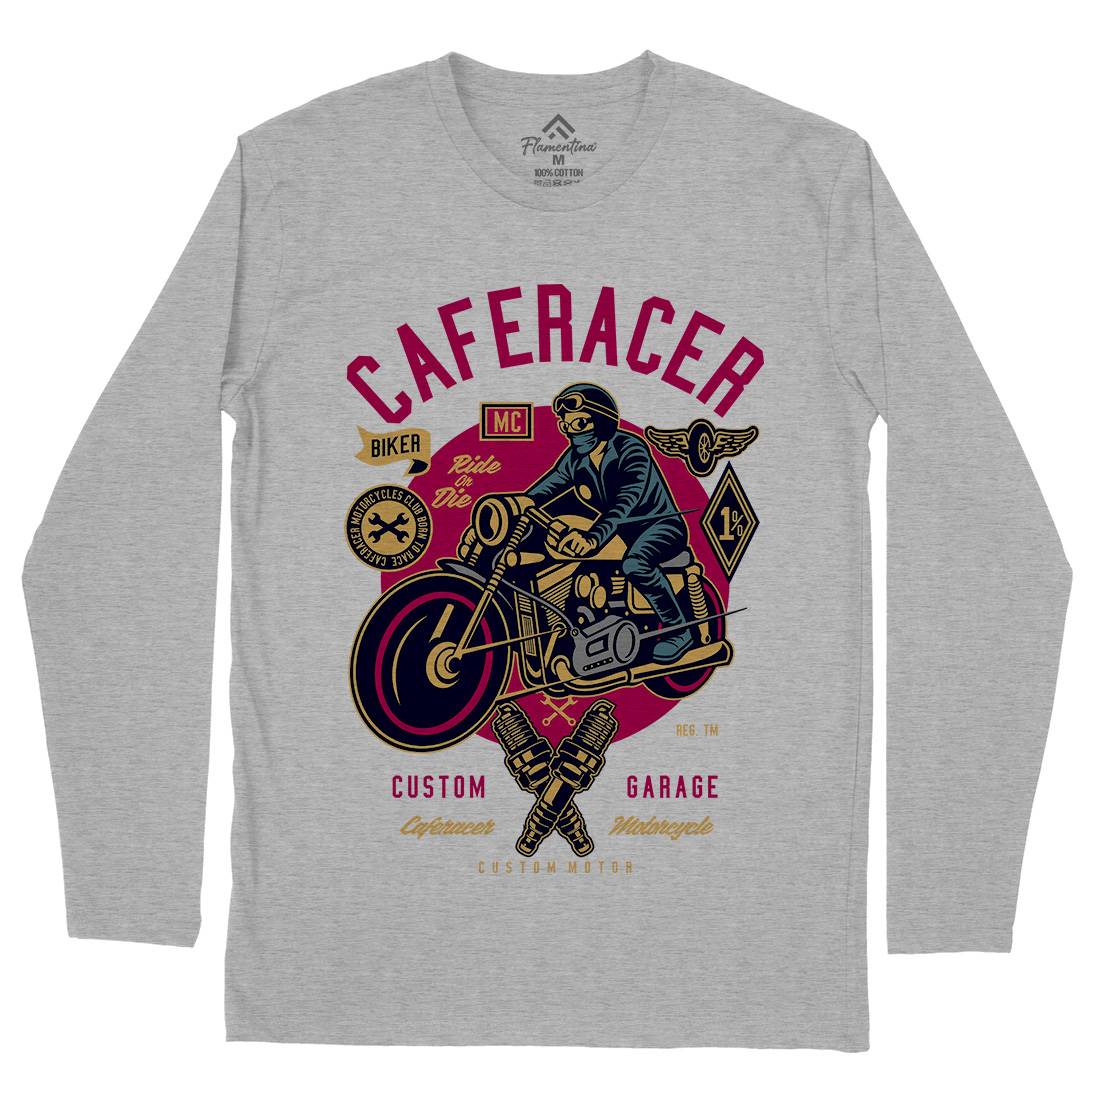 Caferacer Mens Long Sleeve T-Shirt Motorcycles D513